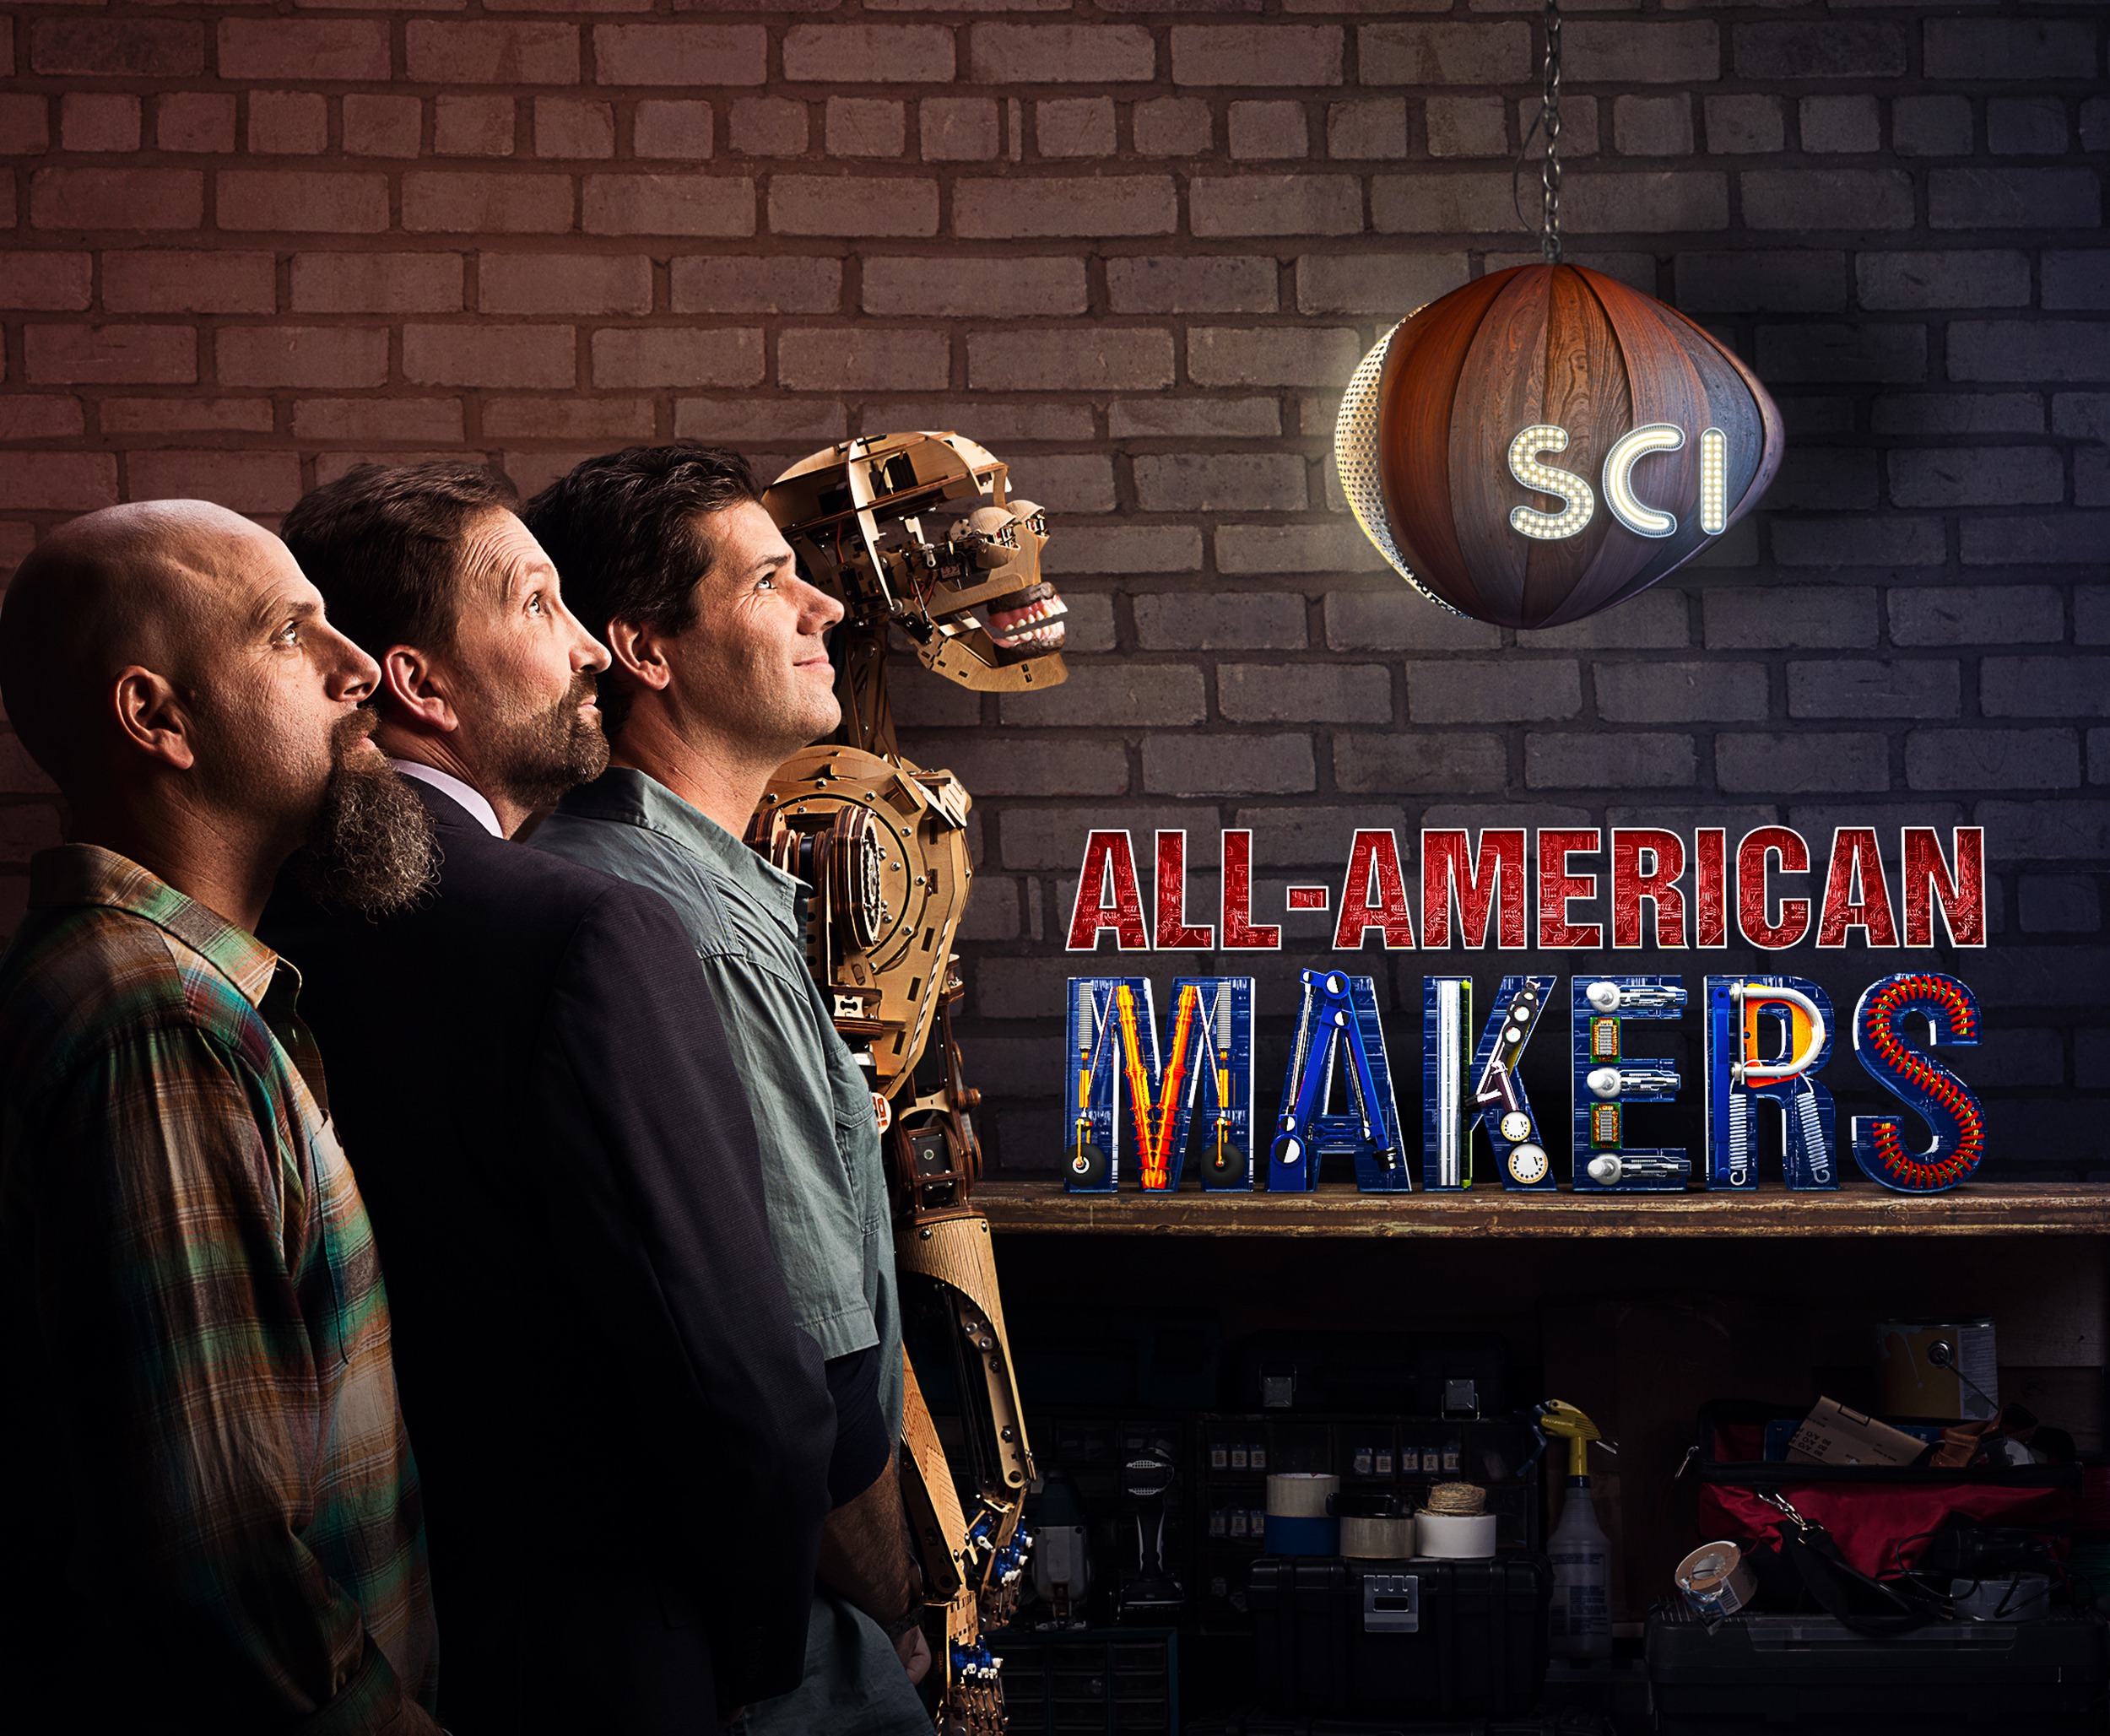 Mega Sized TV Poster Image for All-American Makers 